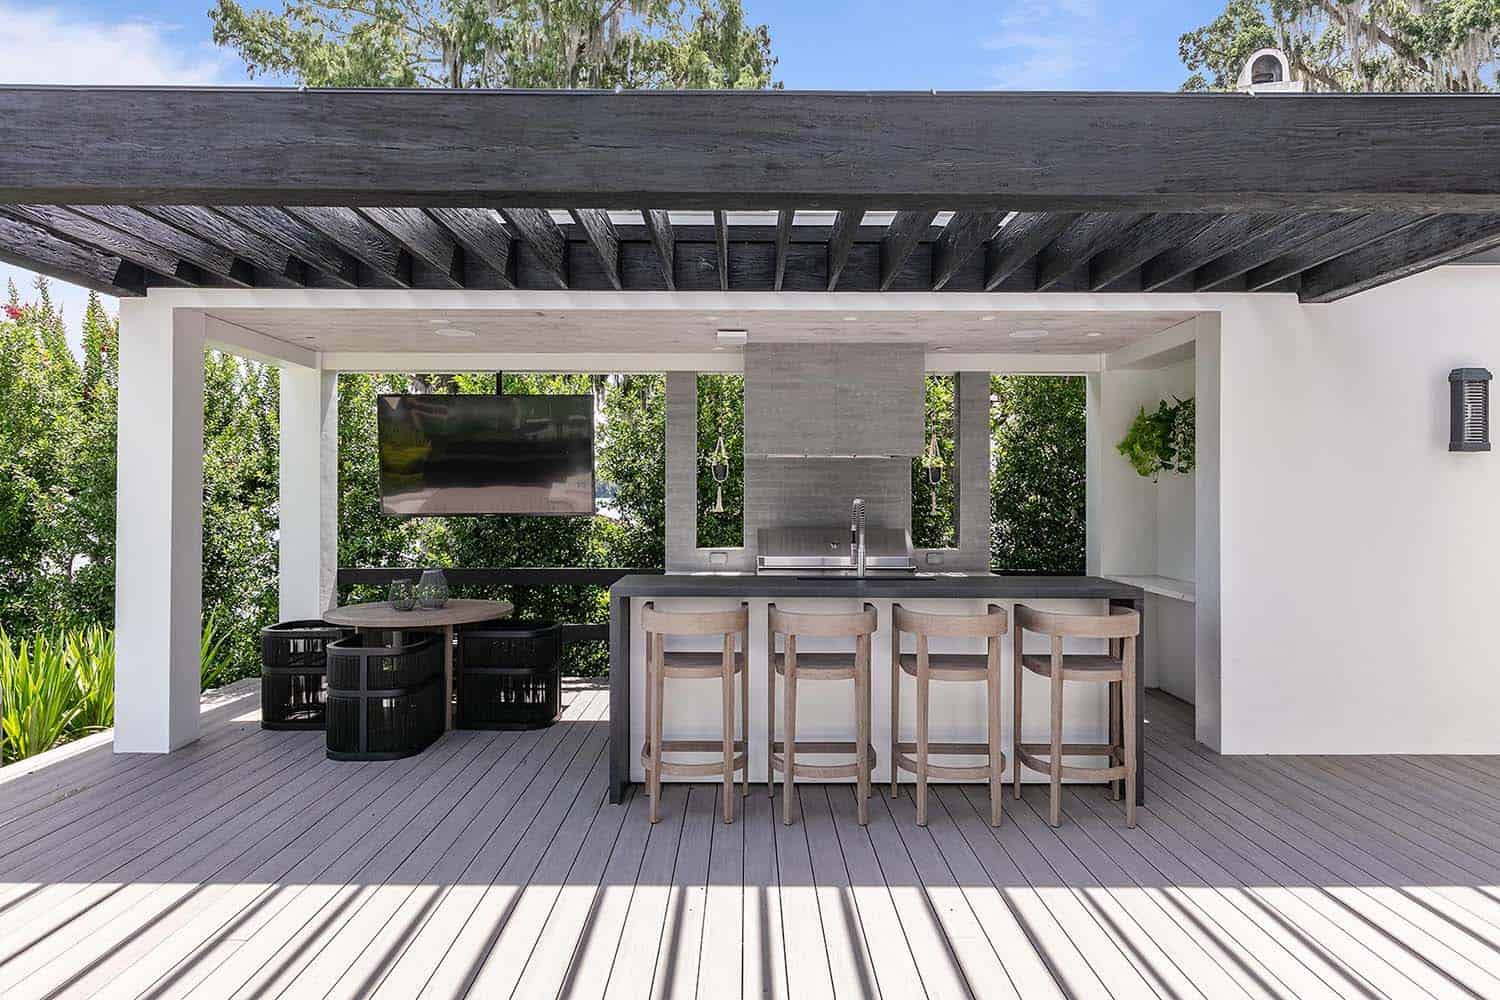 transitional style home outdoor covered patio with a kitchen and dining area